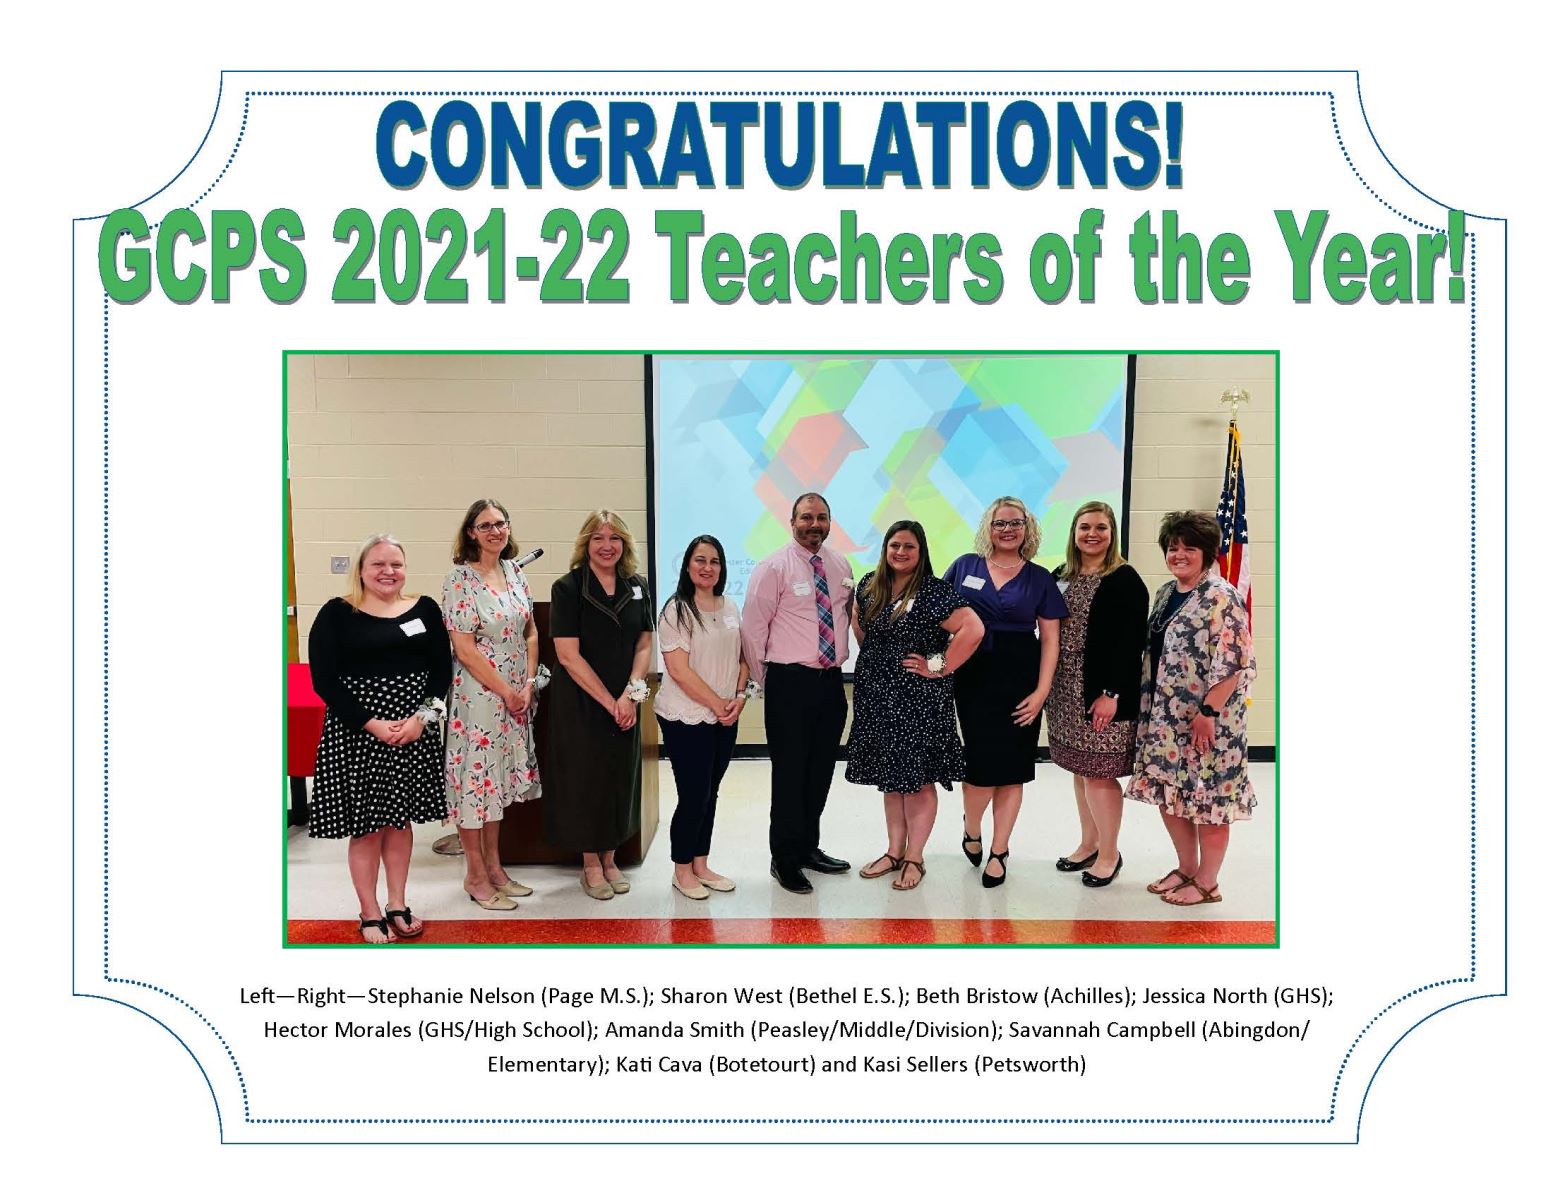 CONGRATULATIONS! GCPS 2021-22 Teachers of the Year! Left-Right-Stephanie Nelson (Page M.S.); Sharon West (Bethel E.S.); Beth Bristow (Achilles); Jessica North (GHS); Hector Morales (GHS/High School); Amanda Smith (Peasley/Middle/Division); Savannah Campbell (Abingdon/ Elementary); Kati Cava (Botetourt) and Kasi Sellers (Petsworth)